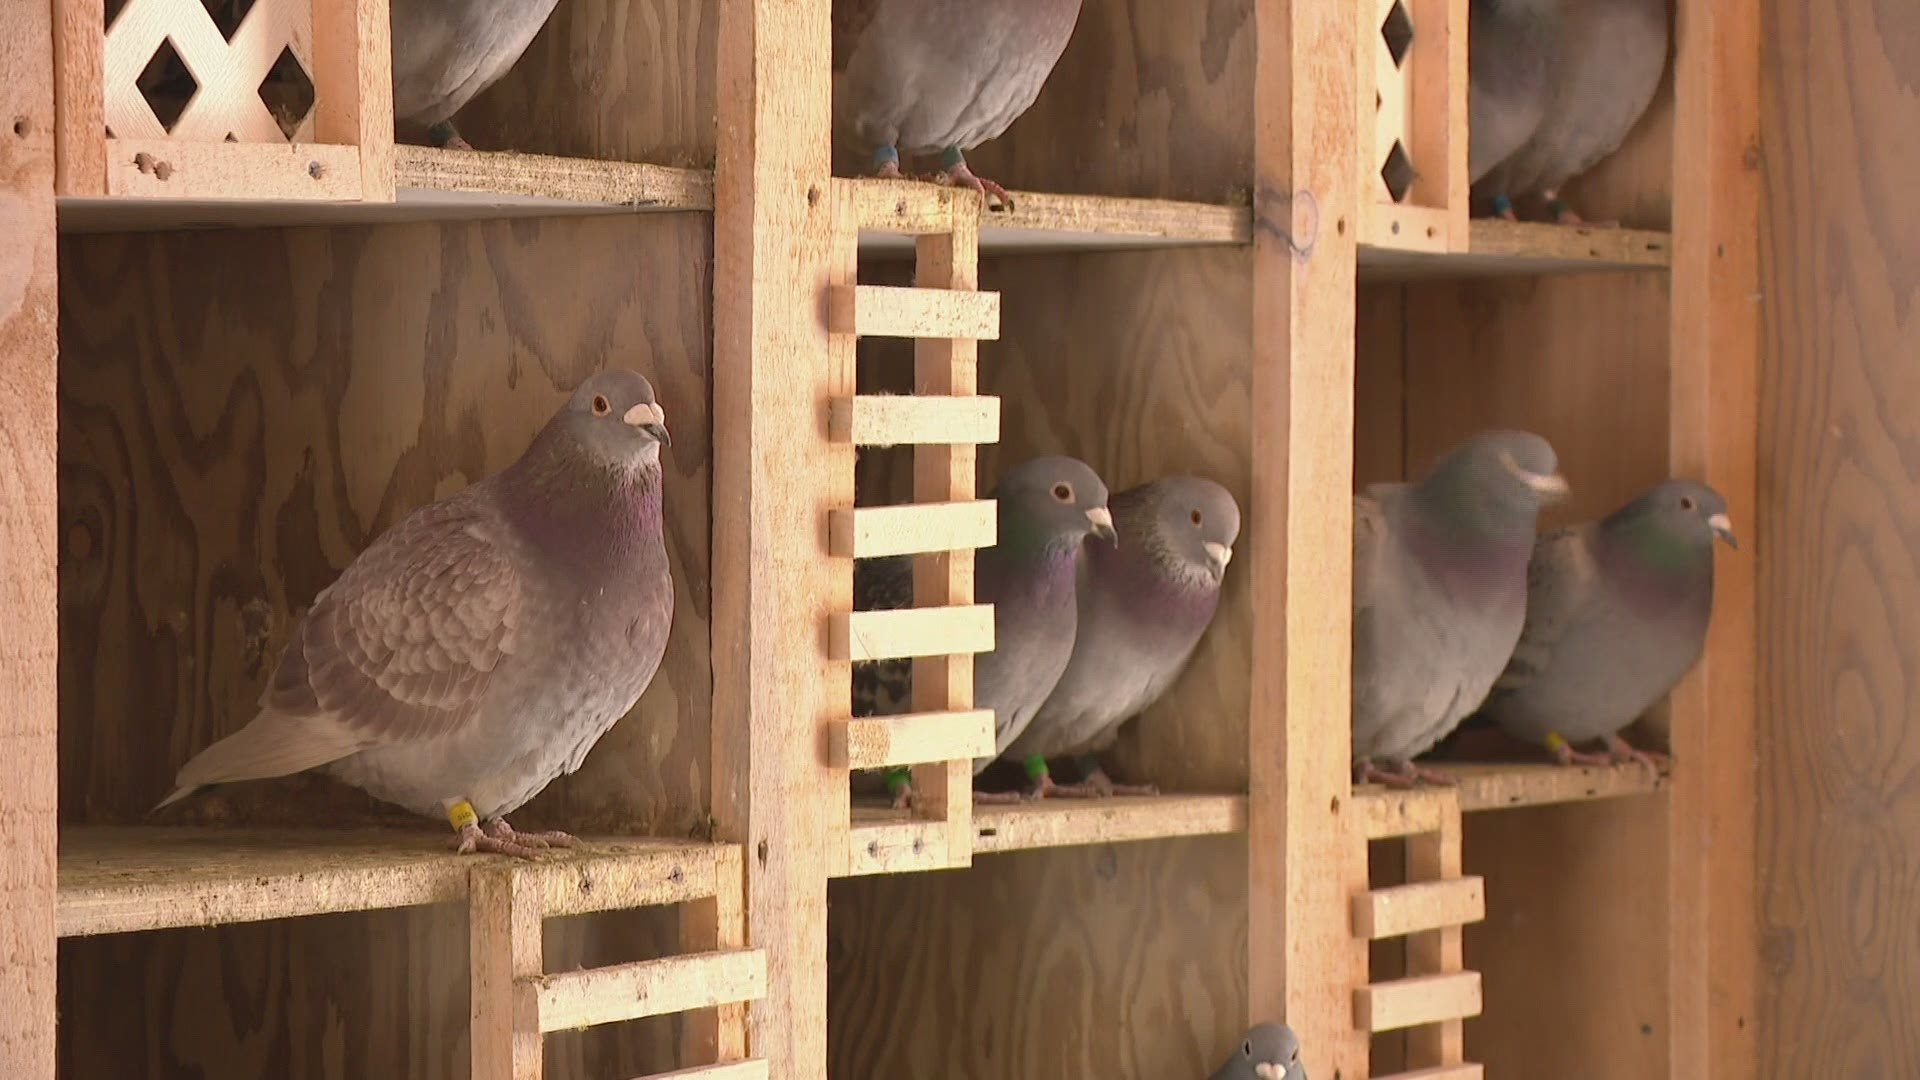 Jim Solak of Edmore, Mi. became captivated by pigeons when he was 12 years old. Today, he owns 102 of them. Their friendship helps him deal with pandemic isolation.